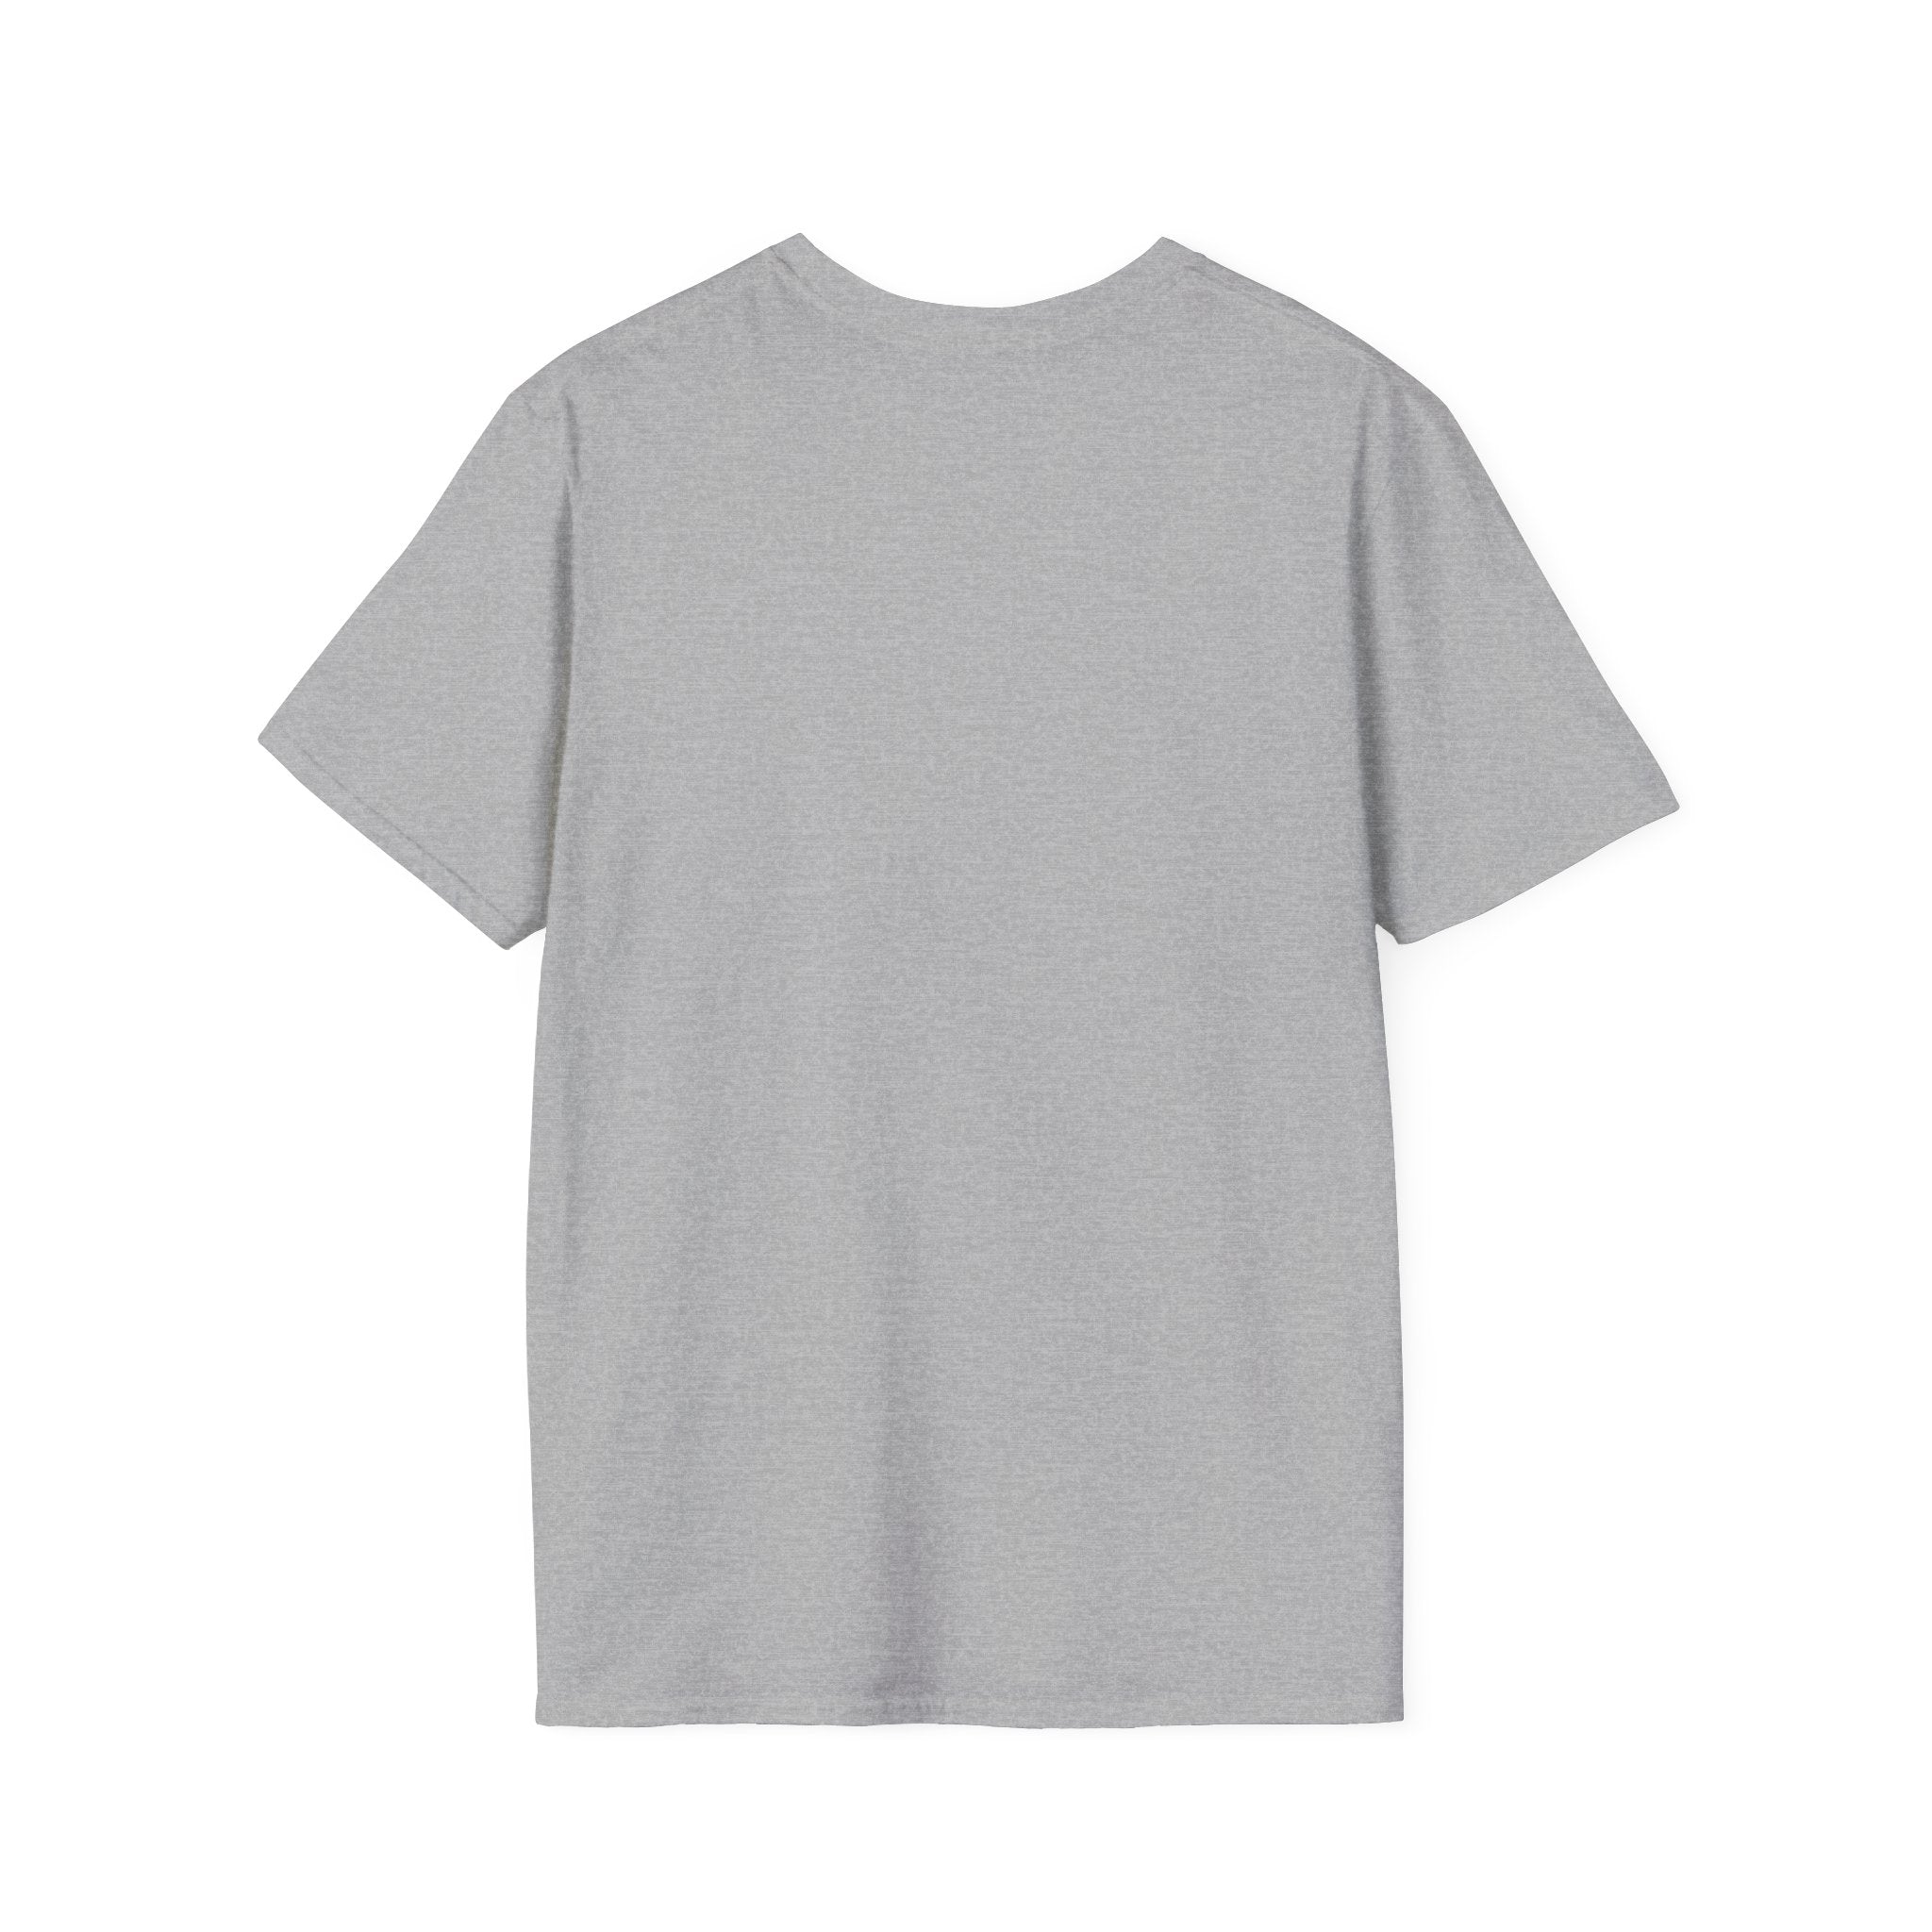 The soft back view of a Skater Angel grey t-shirt.